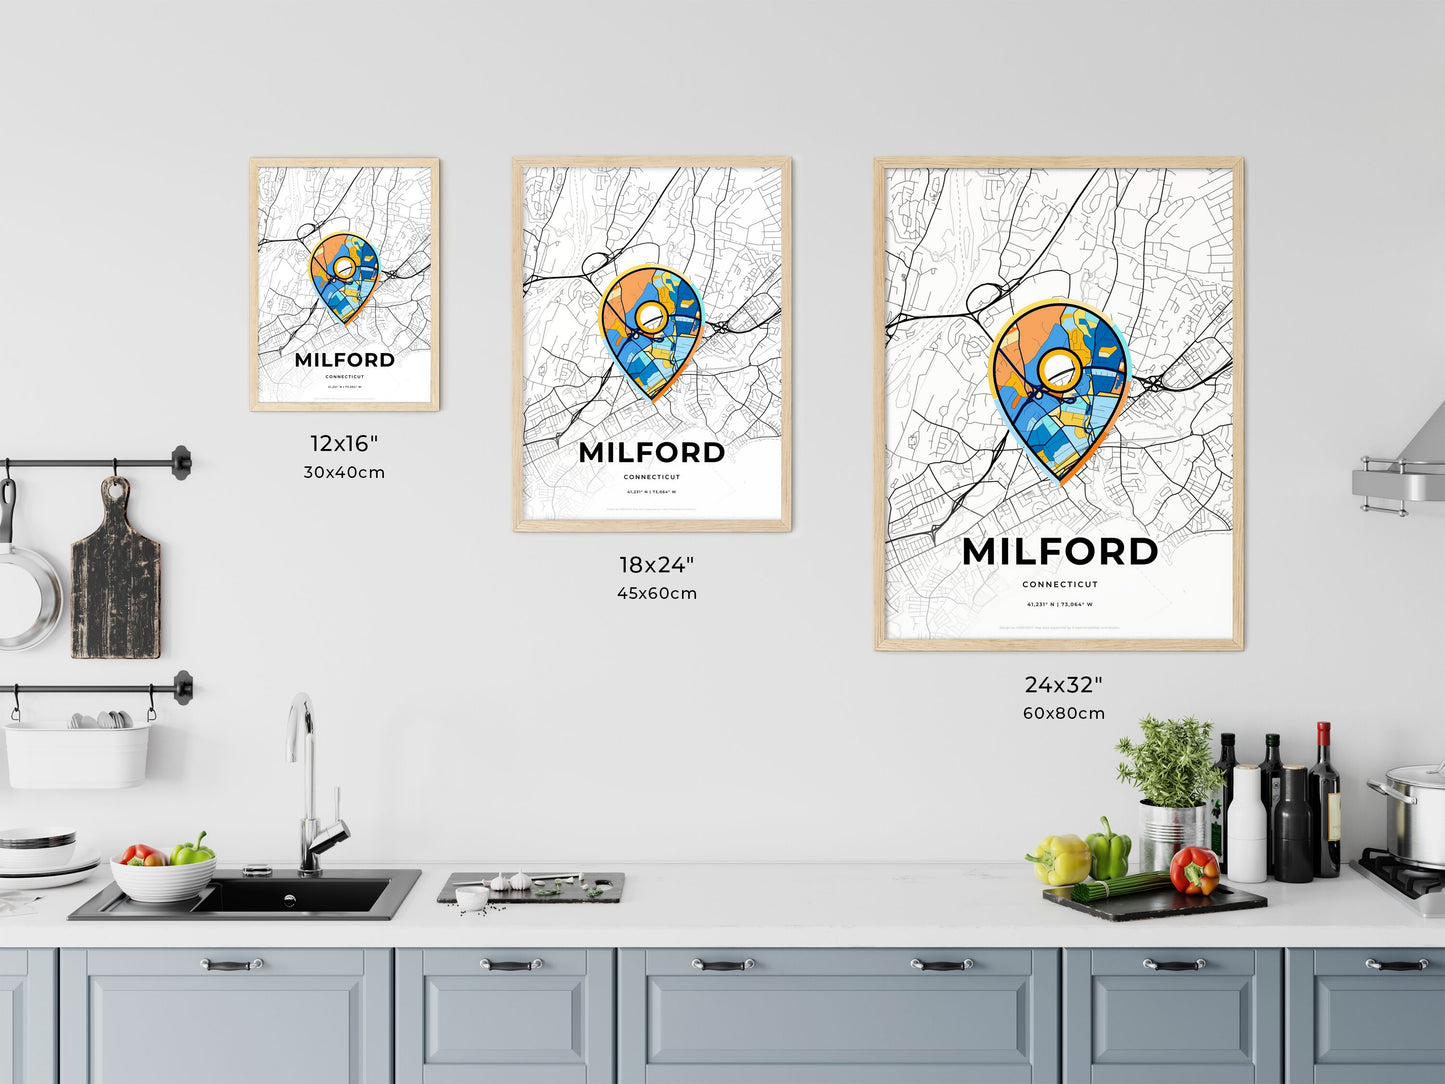 MILFORD CONNECTICUT minimal art map with a colorful icon.